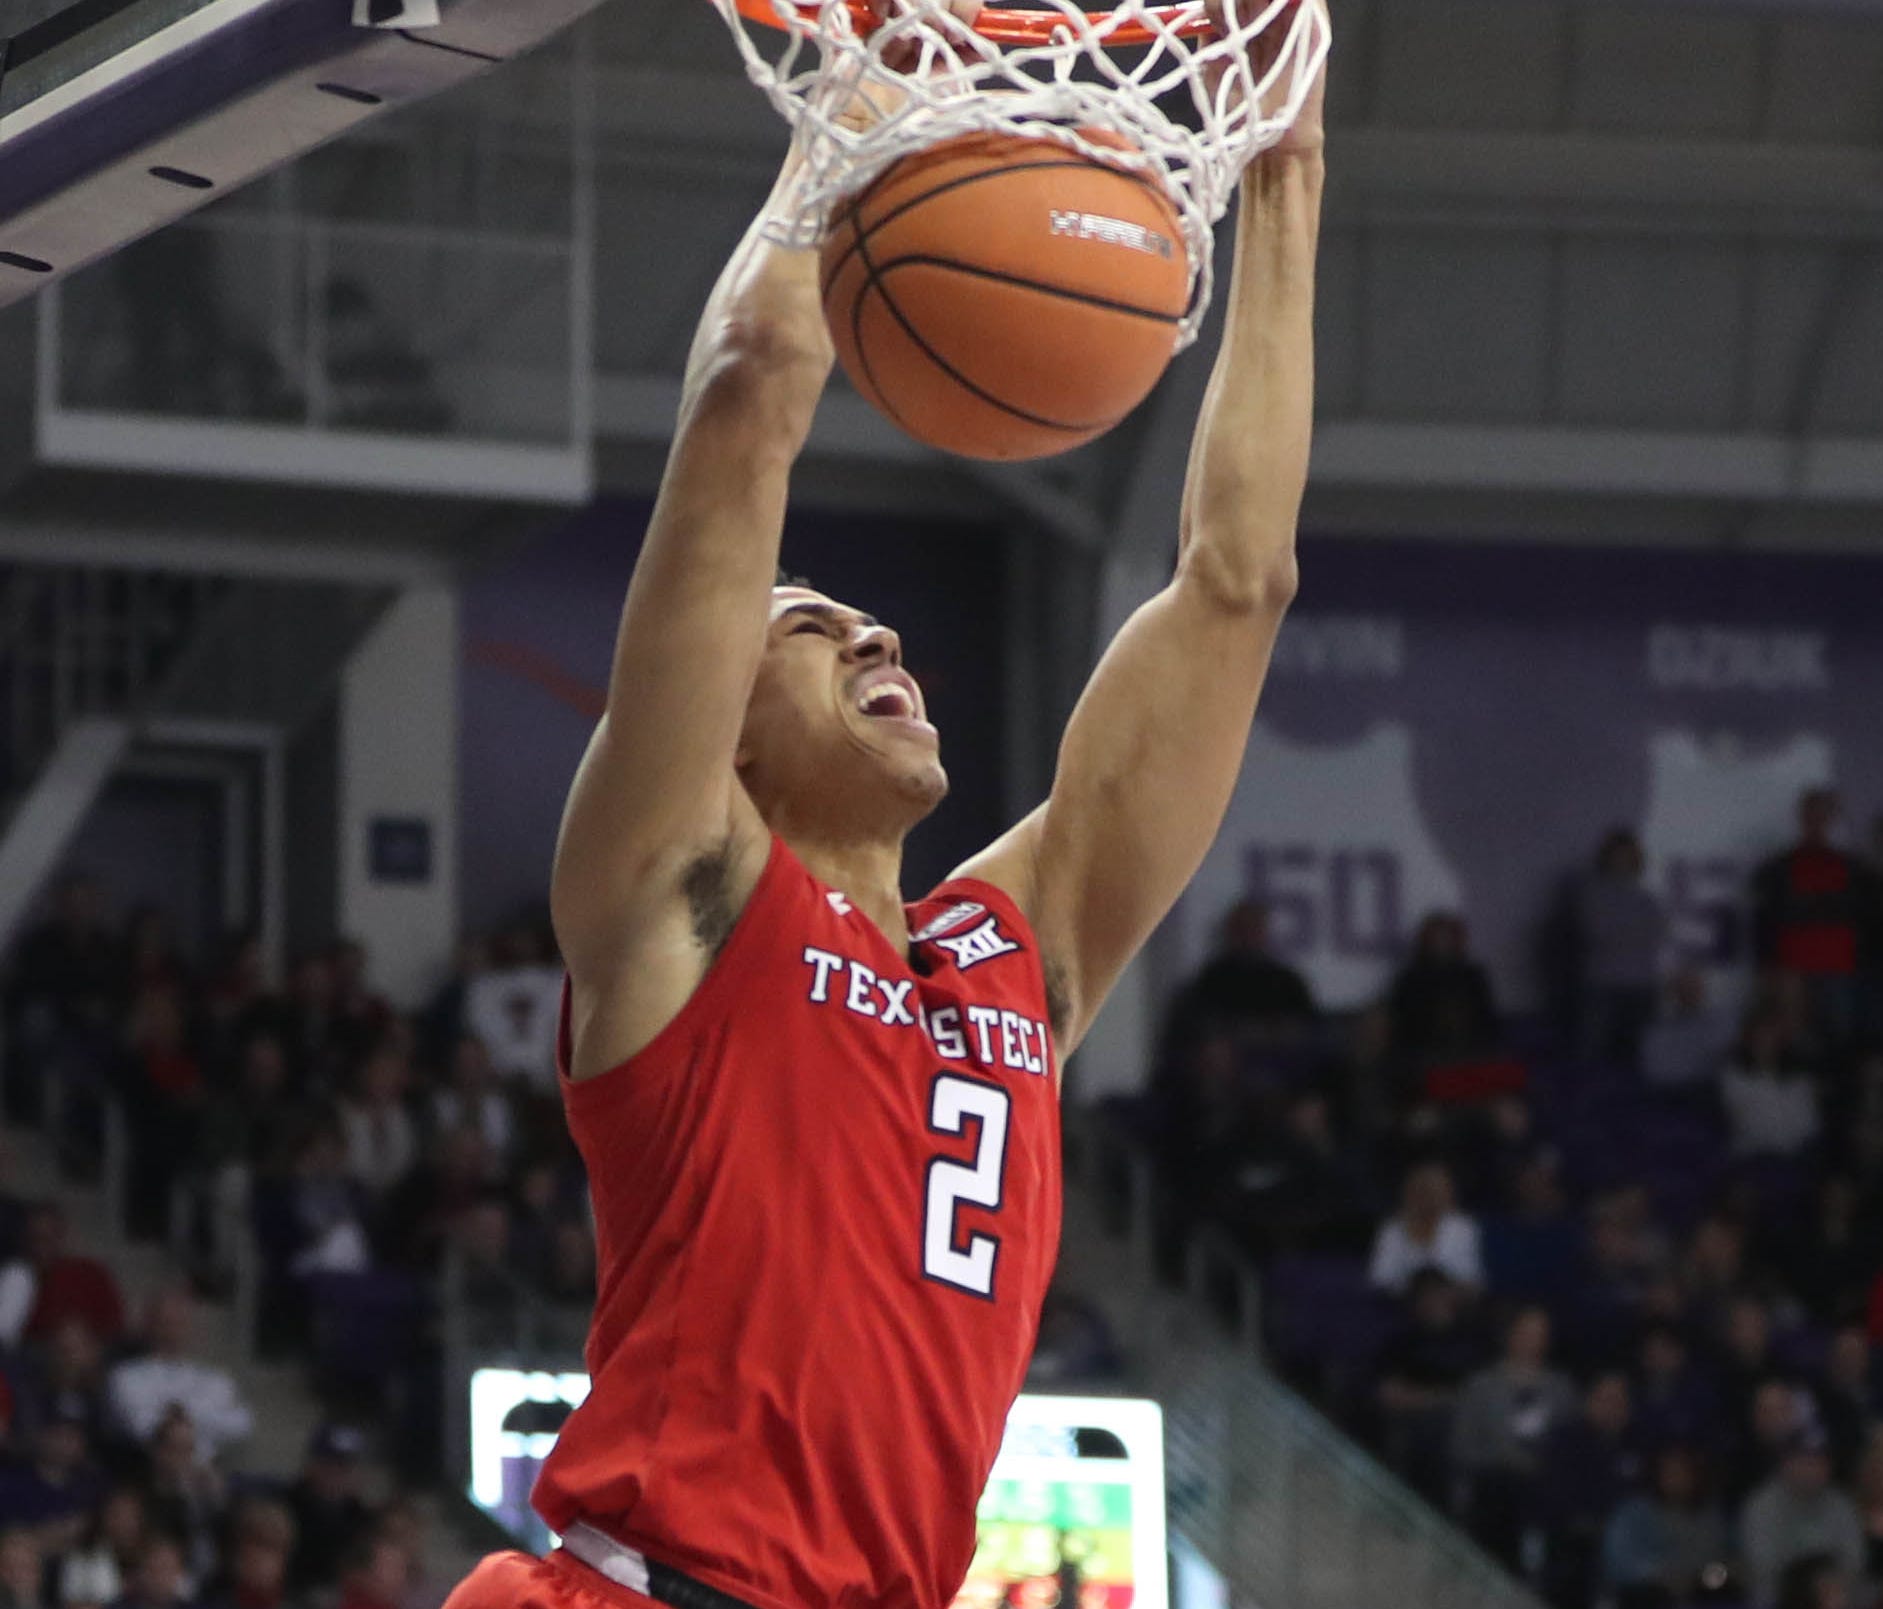 Texas Tech is the best team in the Big 12 and has a dazzling portfolio, but was given a No. 3 seed instead of higher by the selection committee on Sunday.